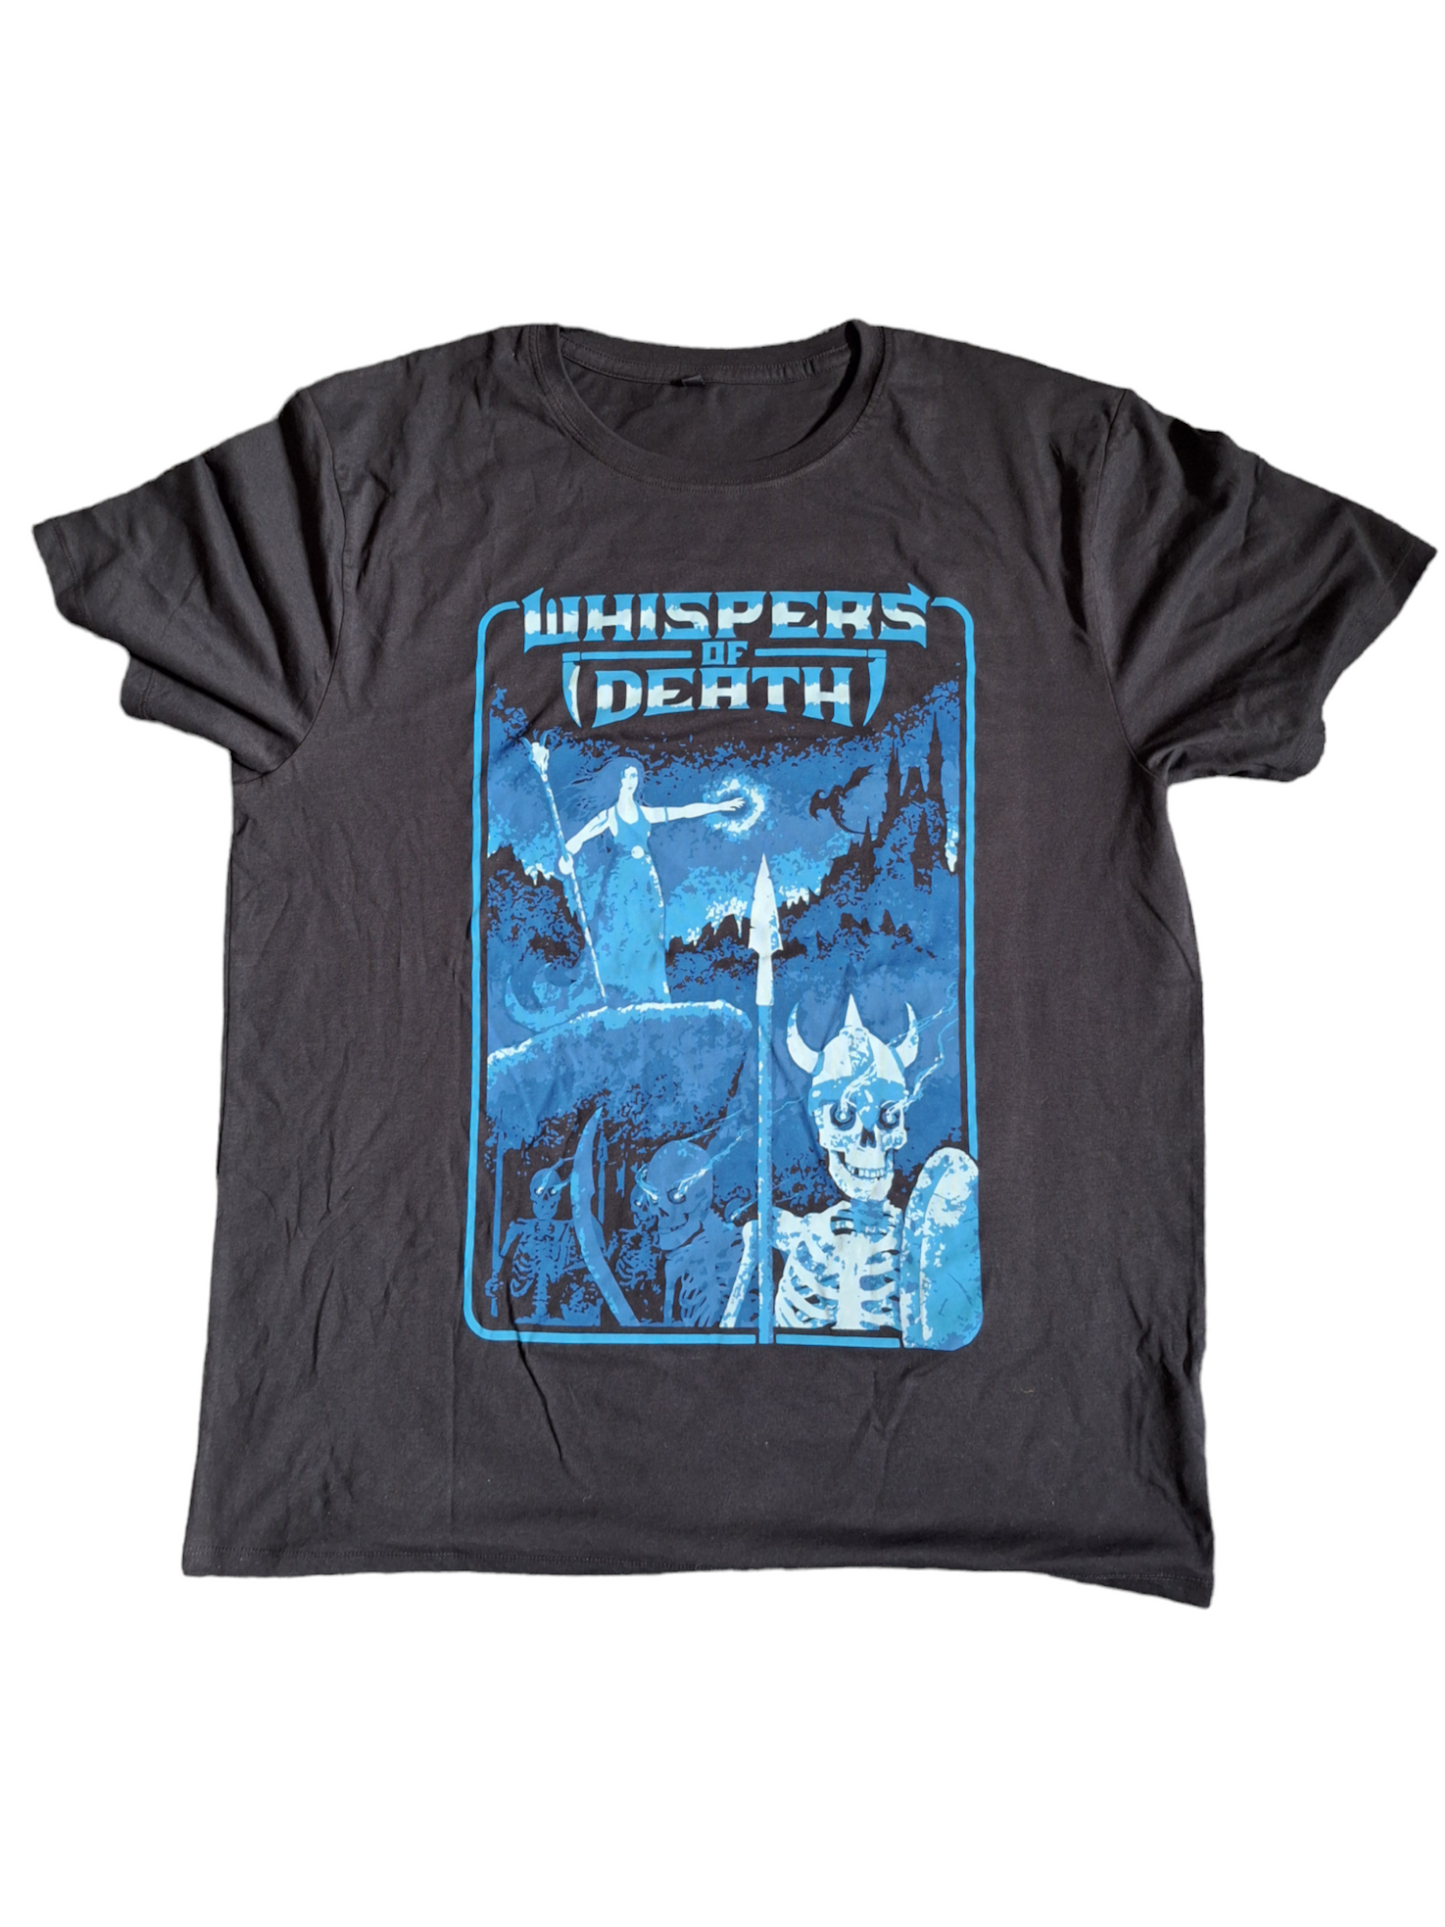 Whispers of Death - Necromancer shirt